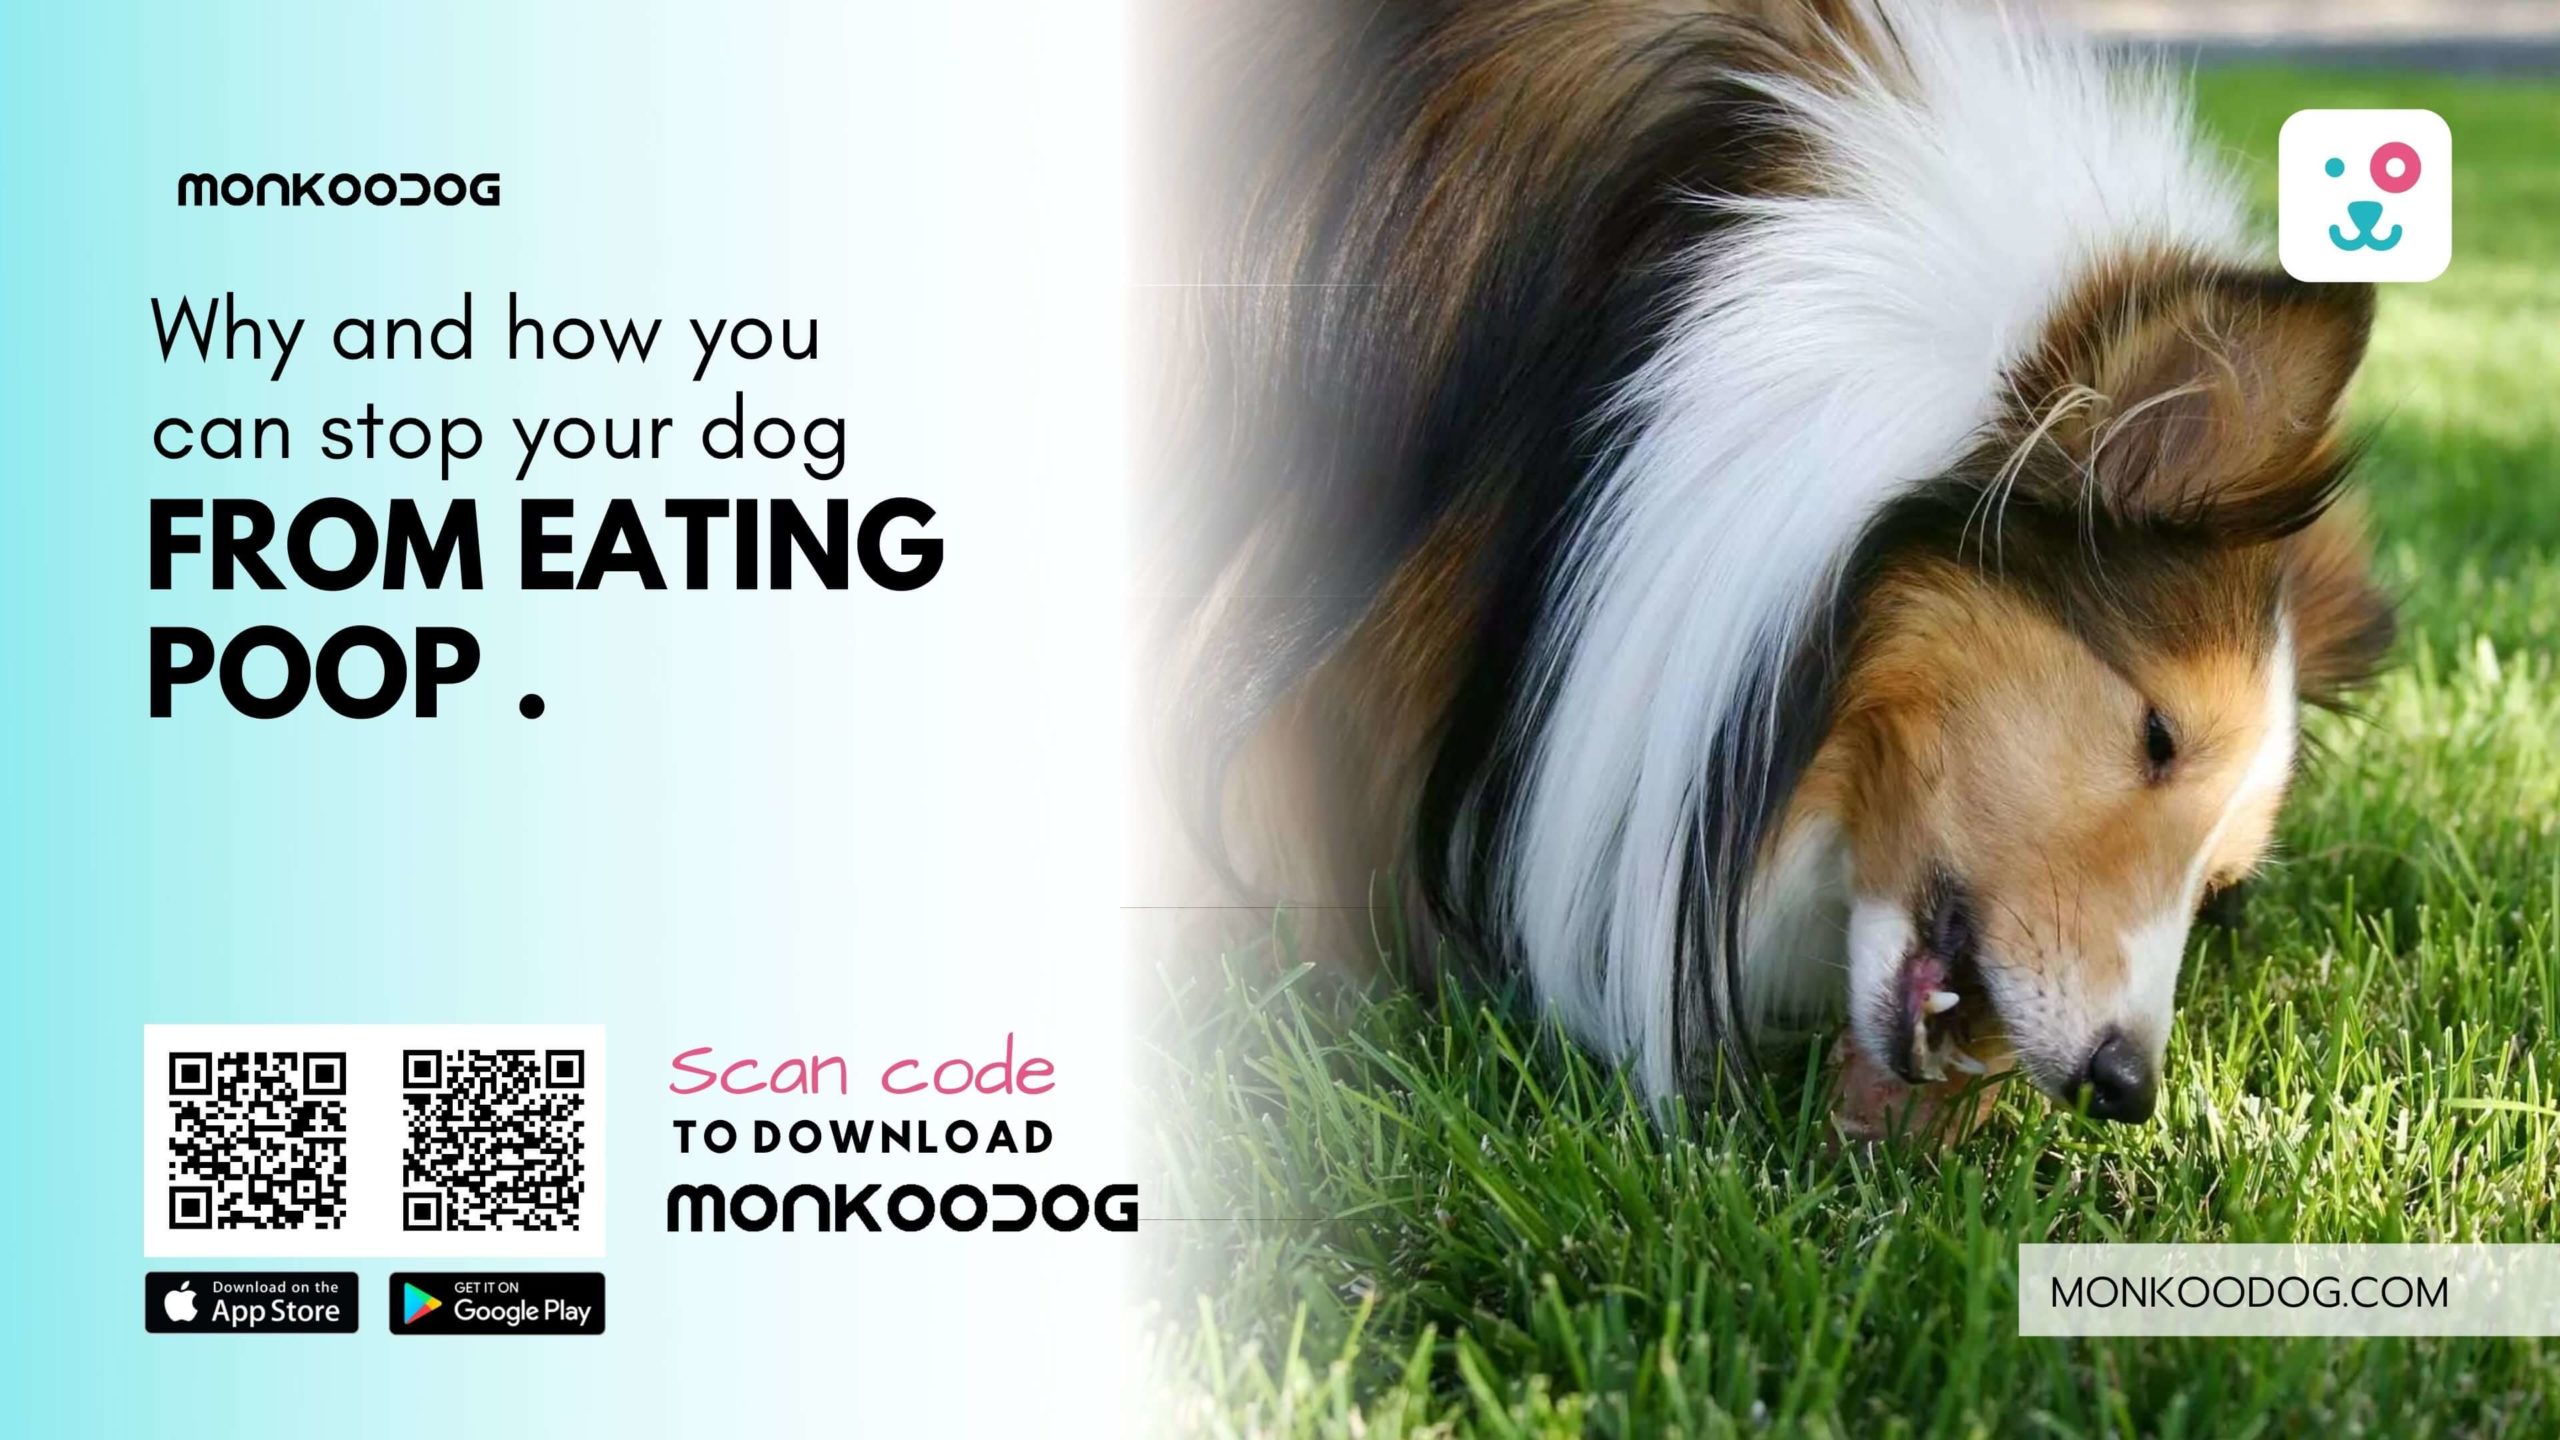 Why and how you can stop your dog from eating poop .